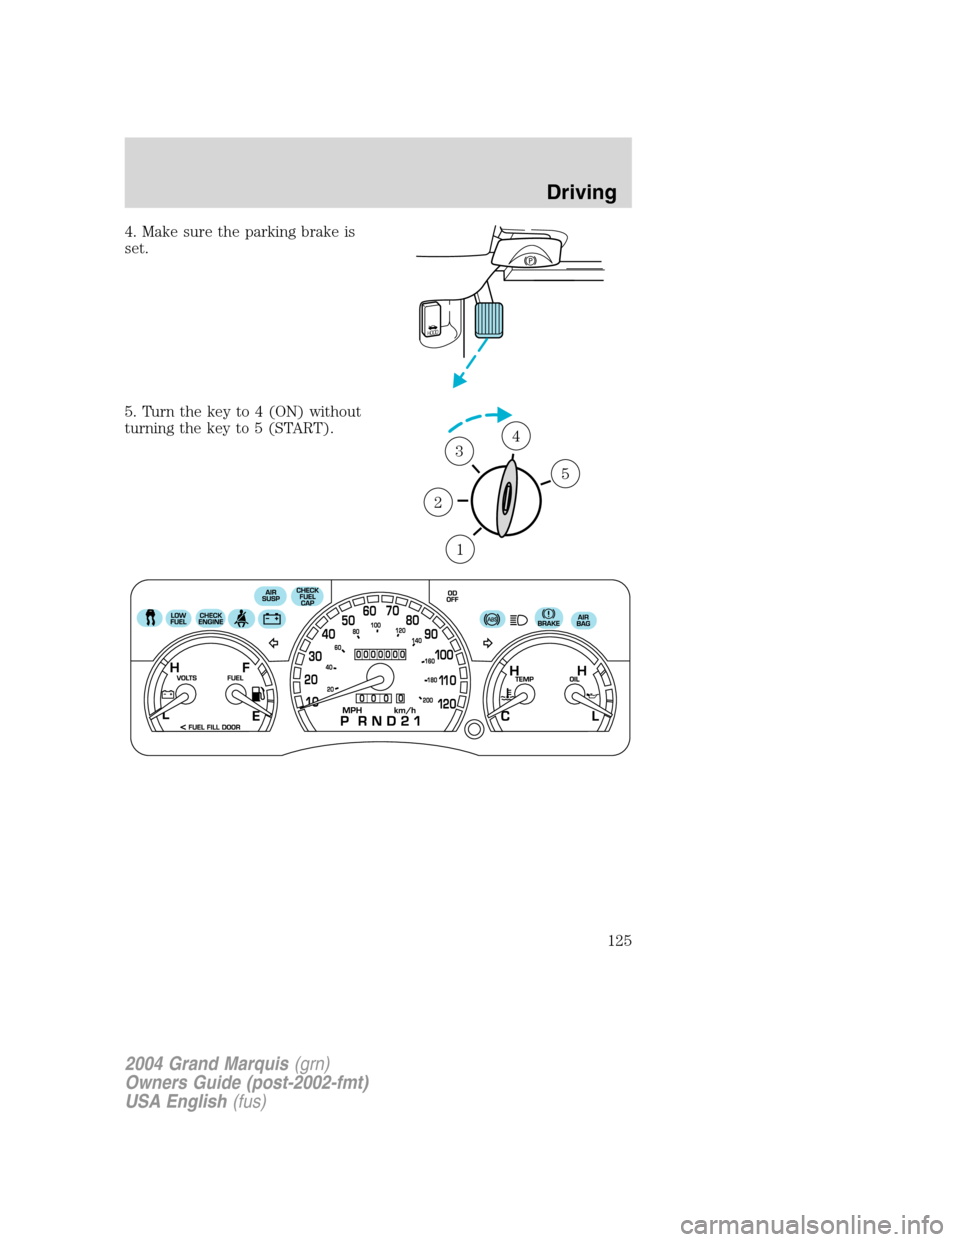 Mercury Grand Marquis 2004  s User Guide 4. Make sure the parking brake is
set.
5. Turn the key to 4 (ON) without
turning the key to 5 (START).
HOOD
1
2
34
5
2004 Grand Marquis(grn)
Owners Guide (post-2002-fmt)
USA English(fus)
Driving
125 